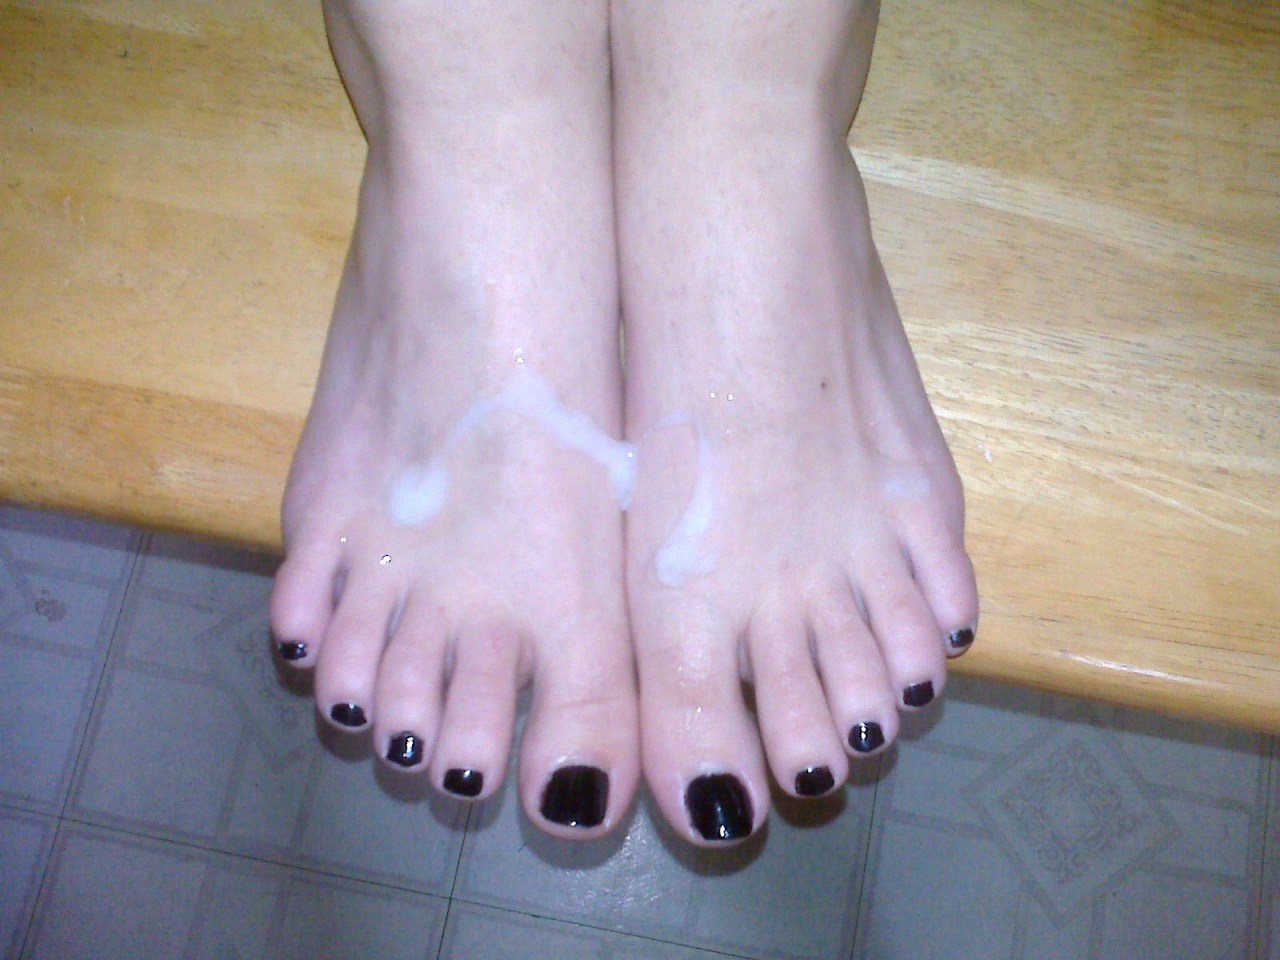 cummytoes:Another lovely submissionAllison’s size 4 1/2 feet get creamed :)